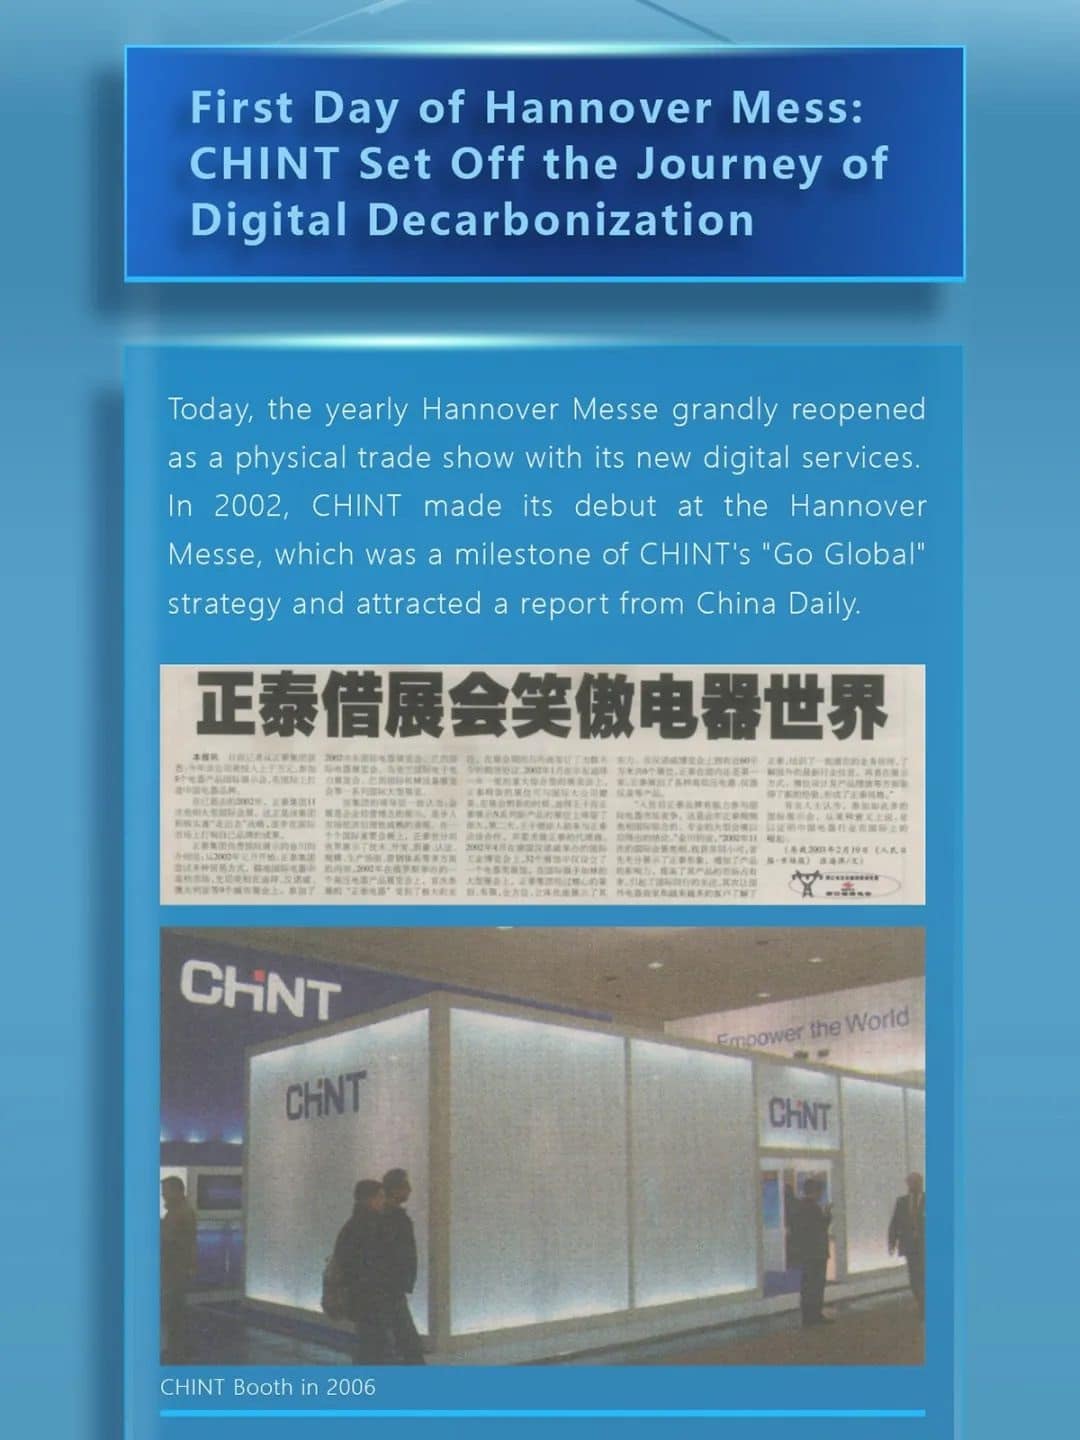 CHINT appears in the Energy Solutions Pavilion of the exhibition hall